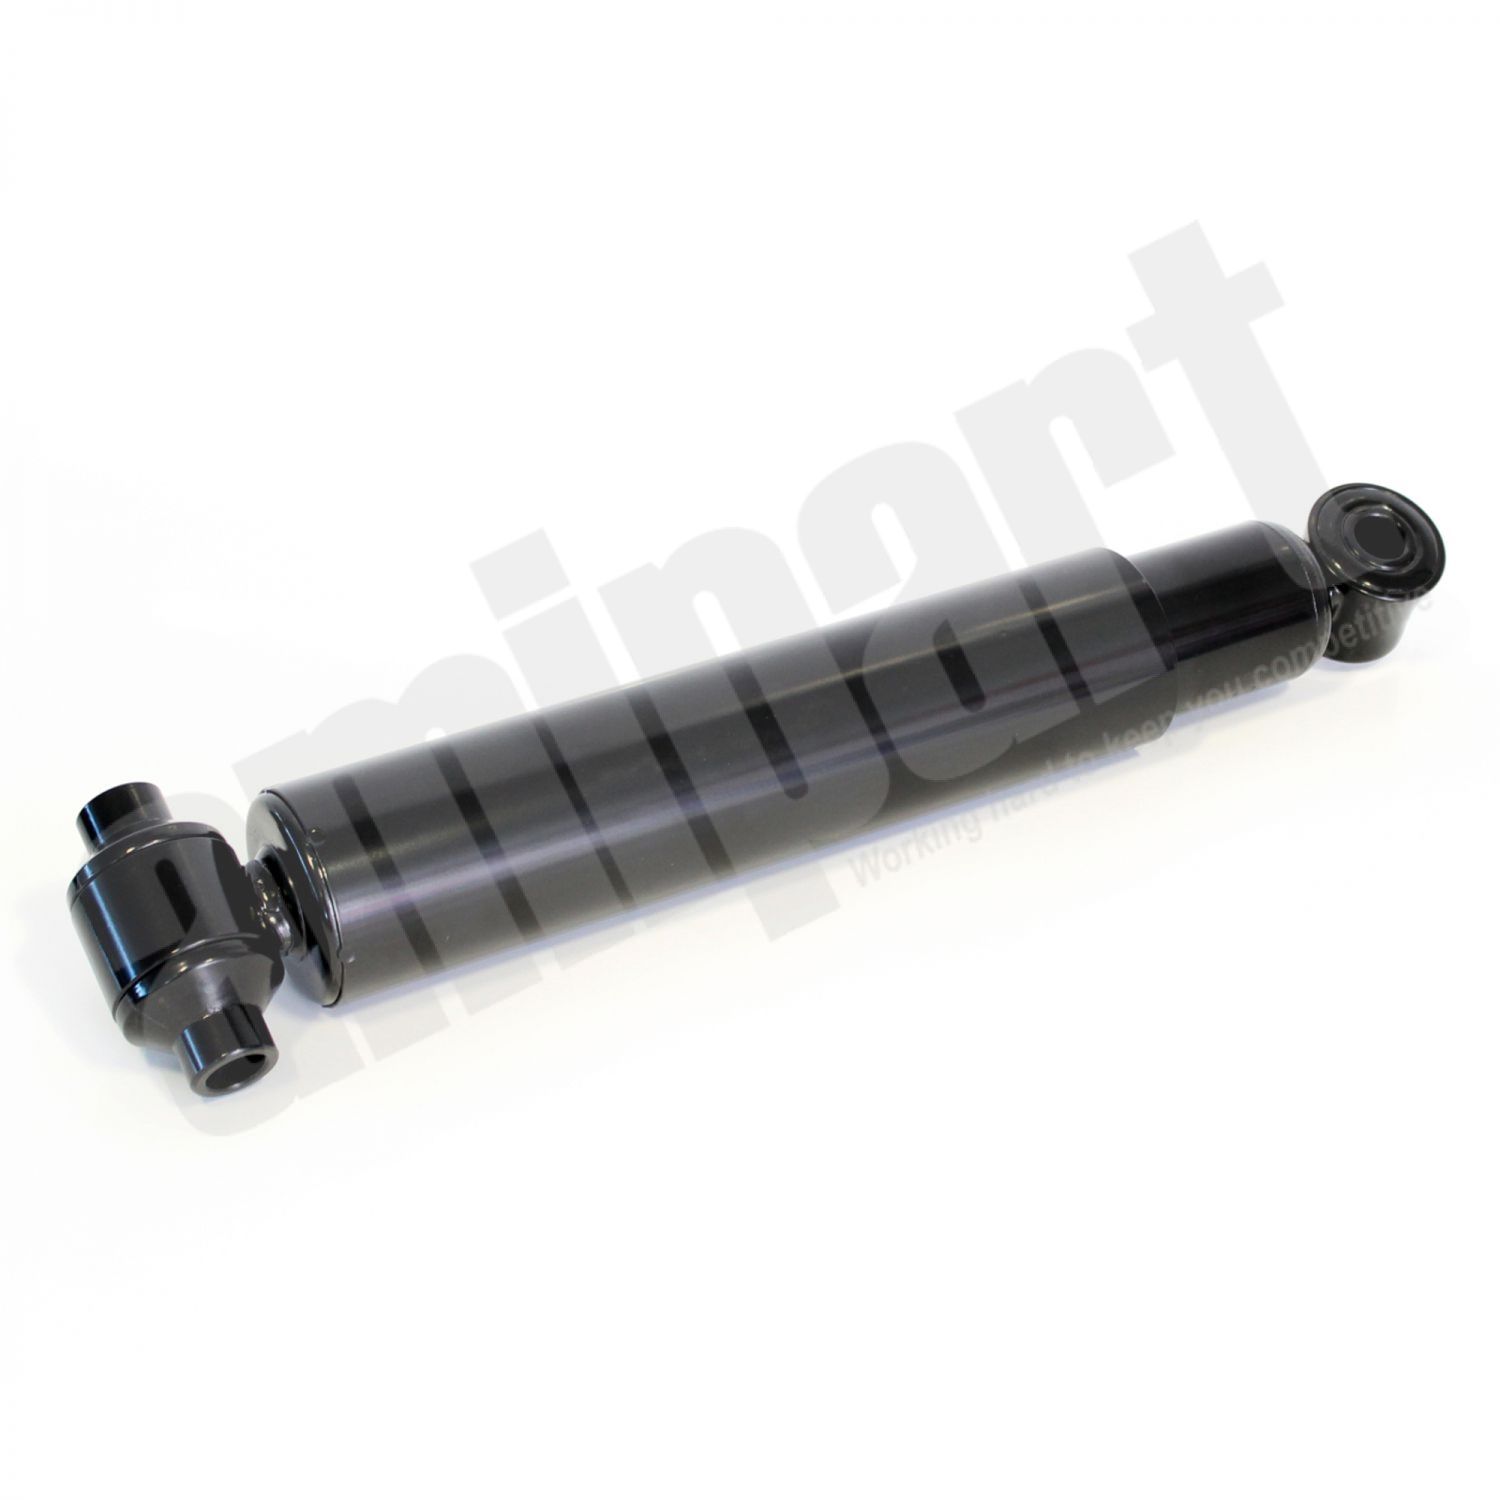 Amipart - MERCEDES SHOCK ABSORBER